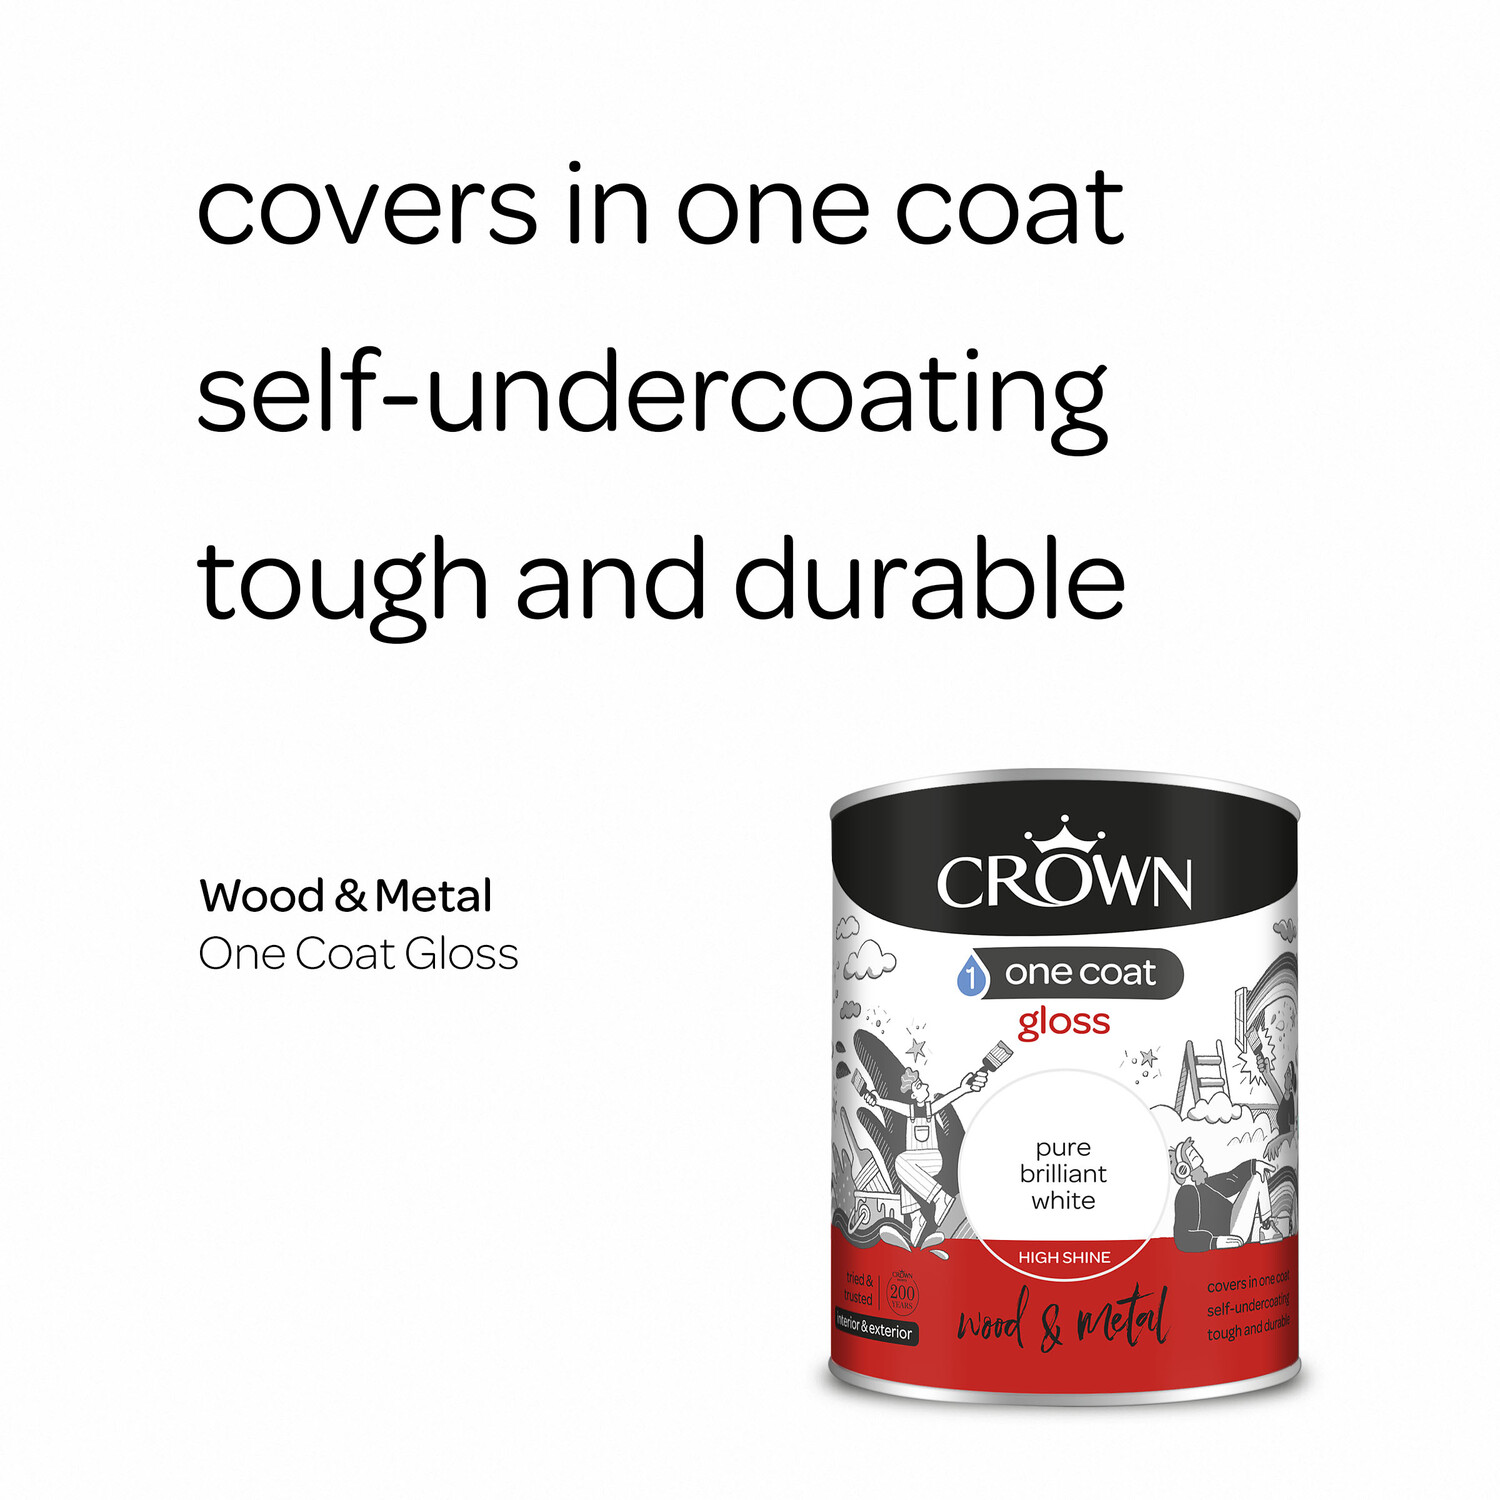 Crown One Coat Wood and Metal Pure Brilliant White Gloss Paint 750ml Image 7